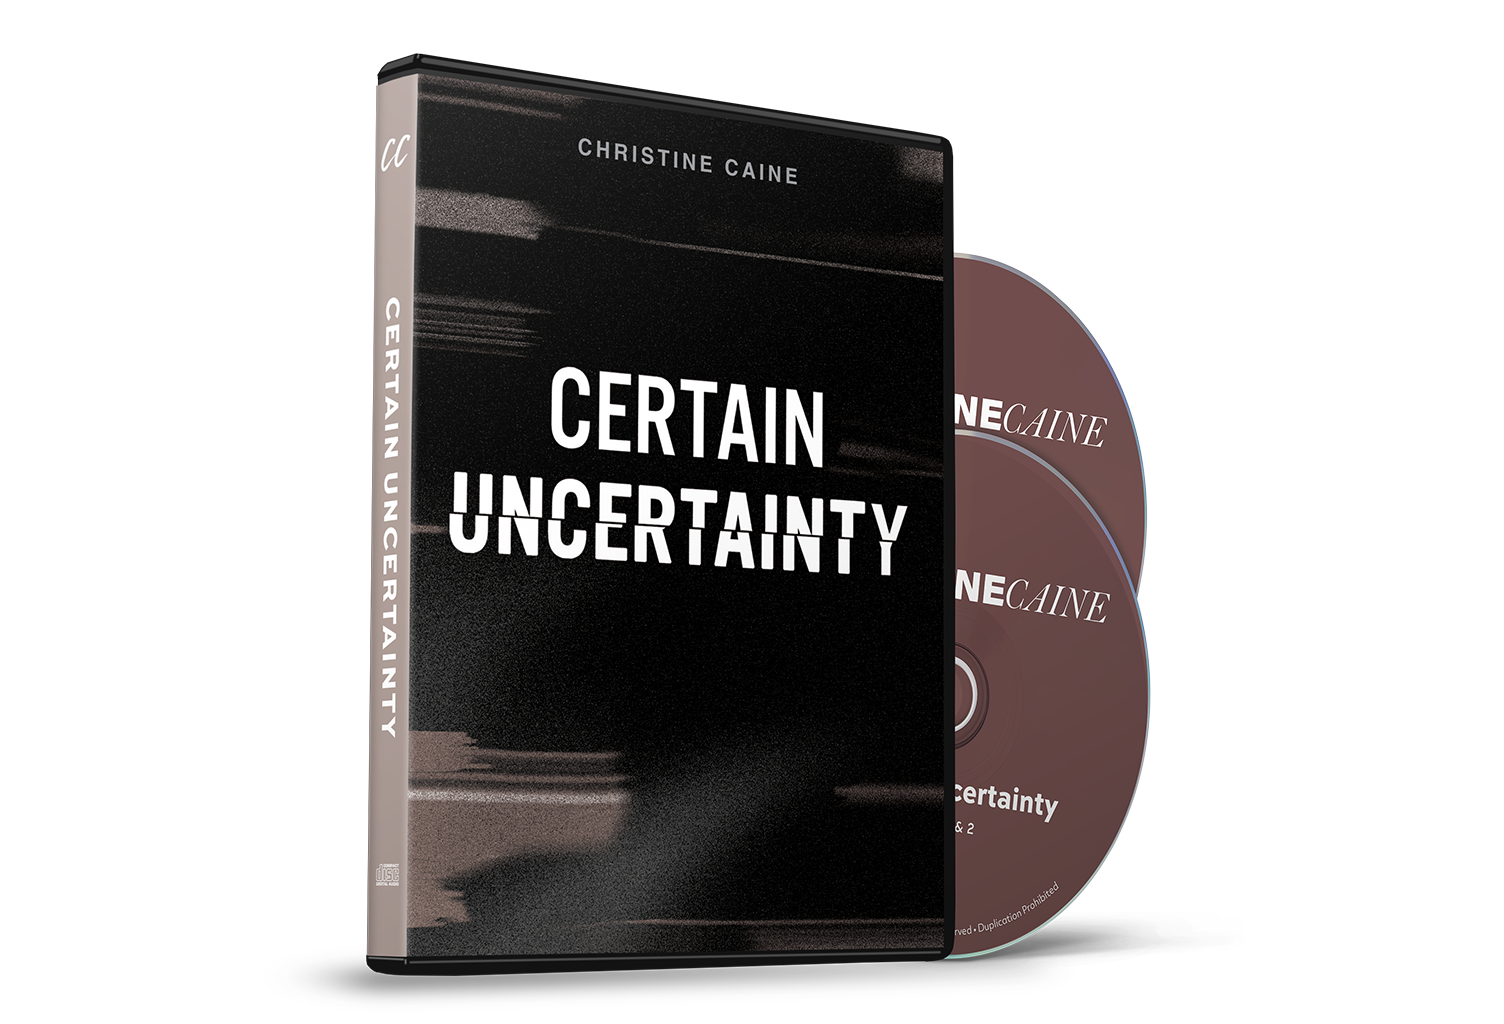 Certain Uncertainty by Christine Caine from TBN